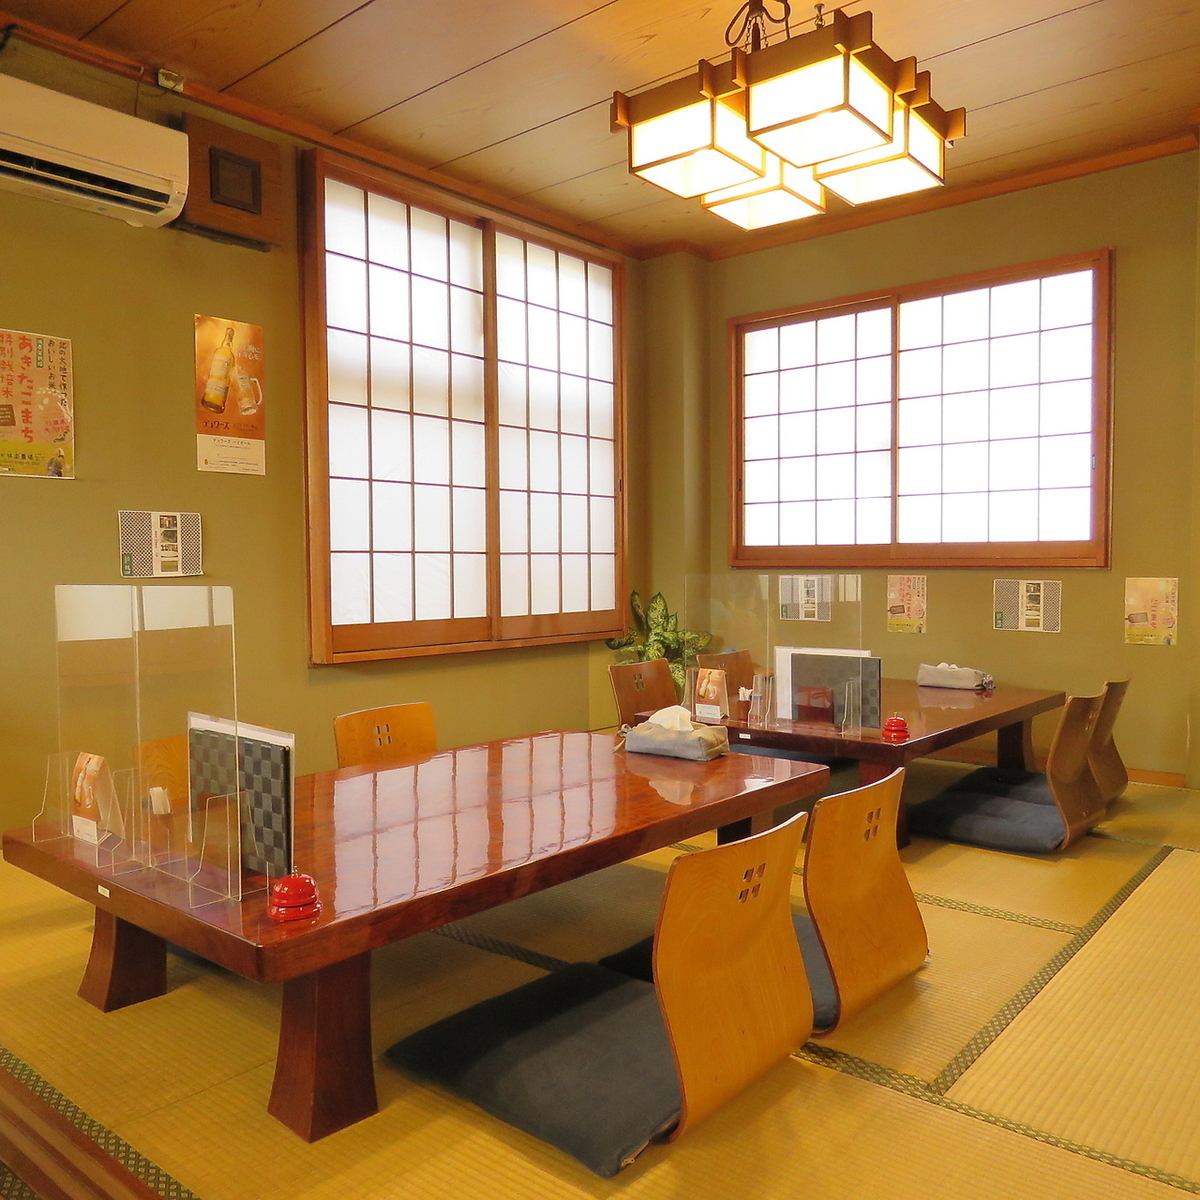 There is a tatami room seat.